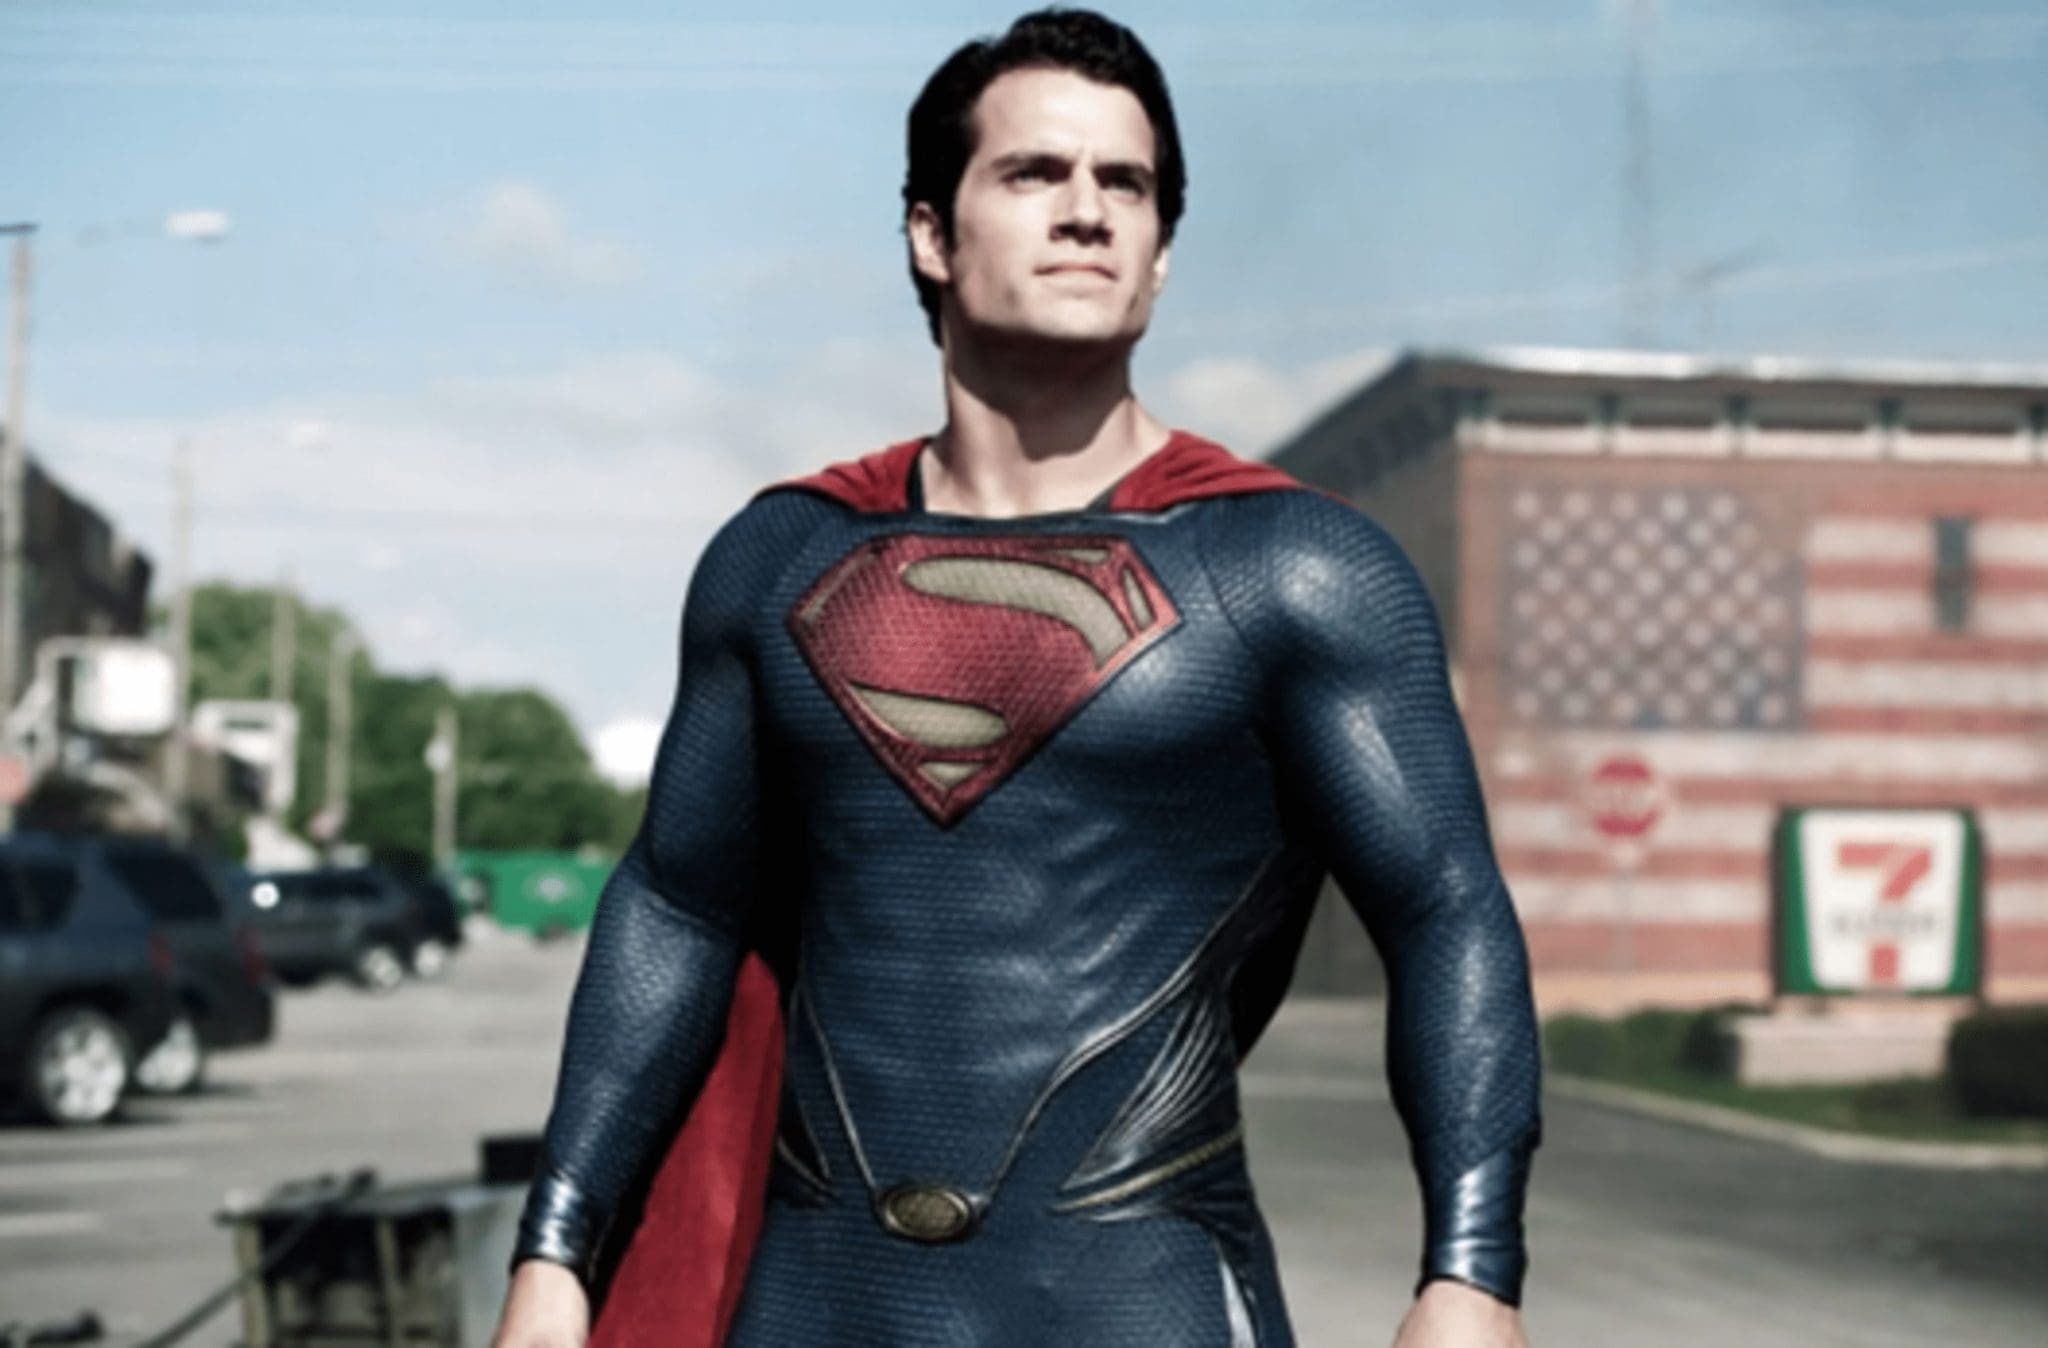 Henry Cavill, Who Portrays Superman, Claims He Is Filled With Unbridled Optimism About The Future